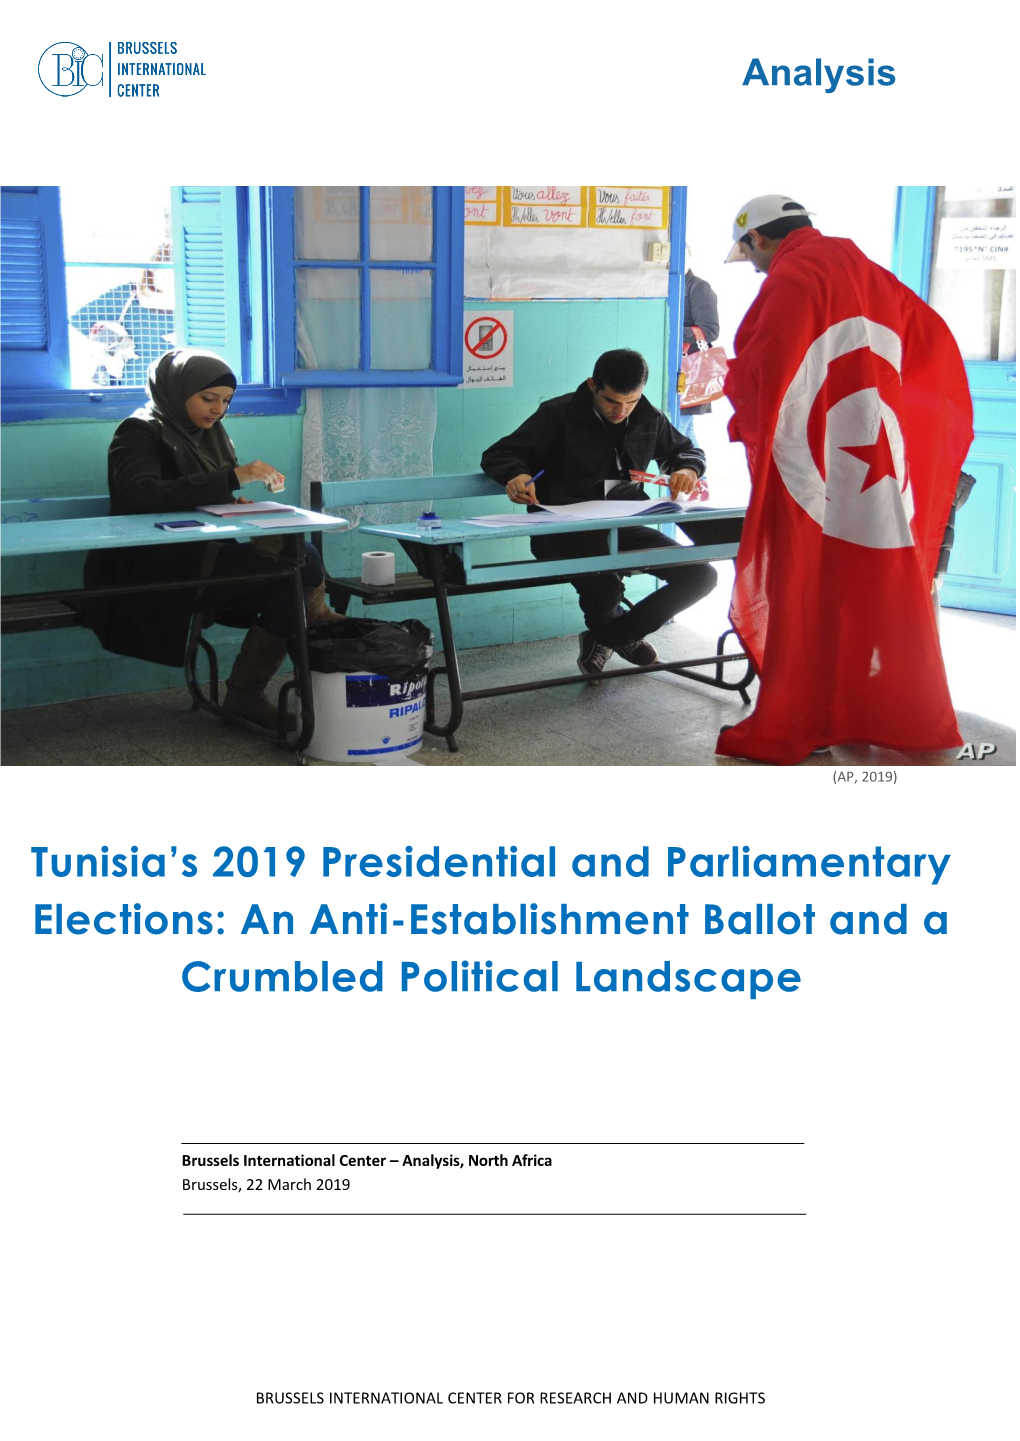 Tunisia's 2019 Presidential and Parliamentary Elections